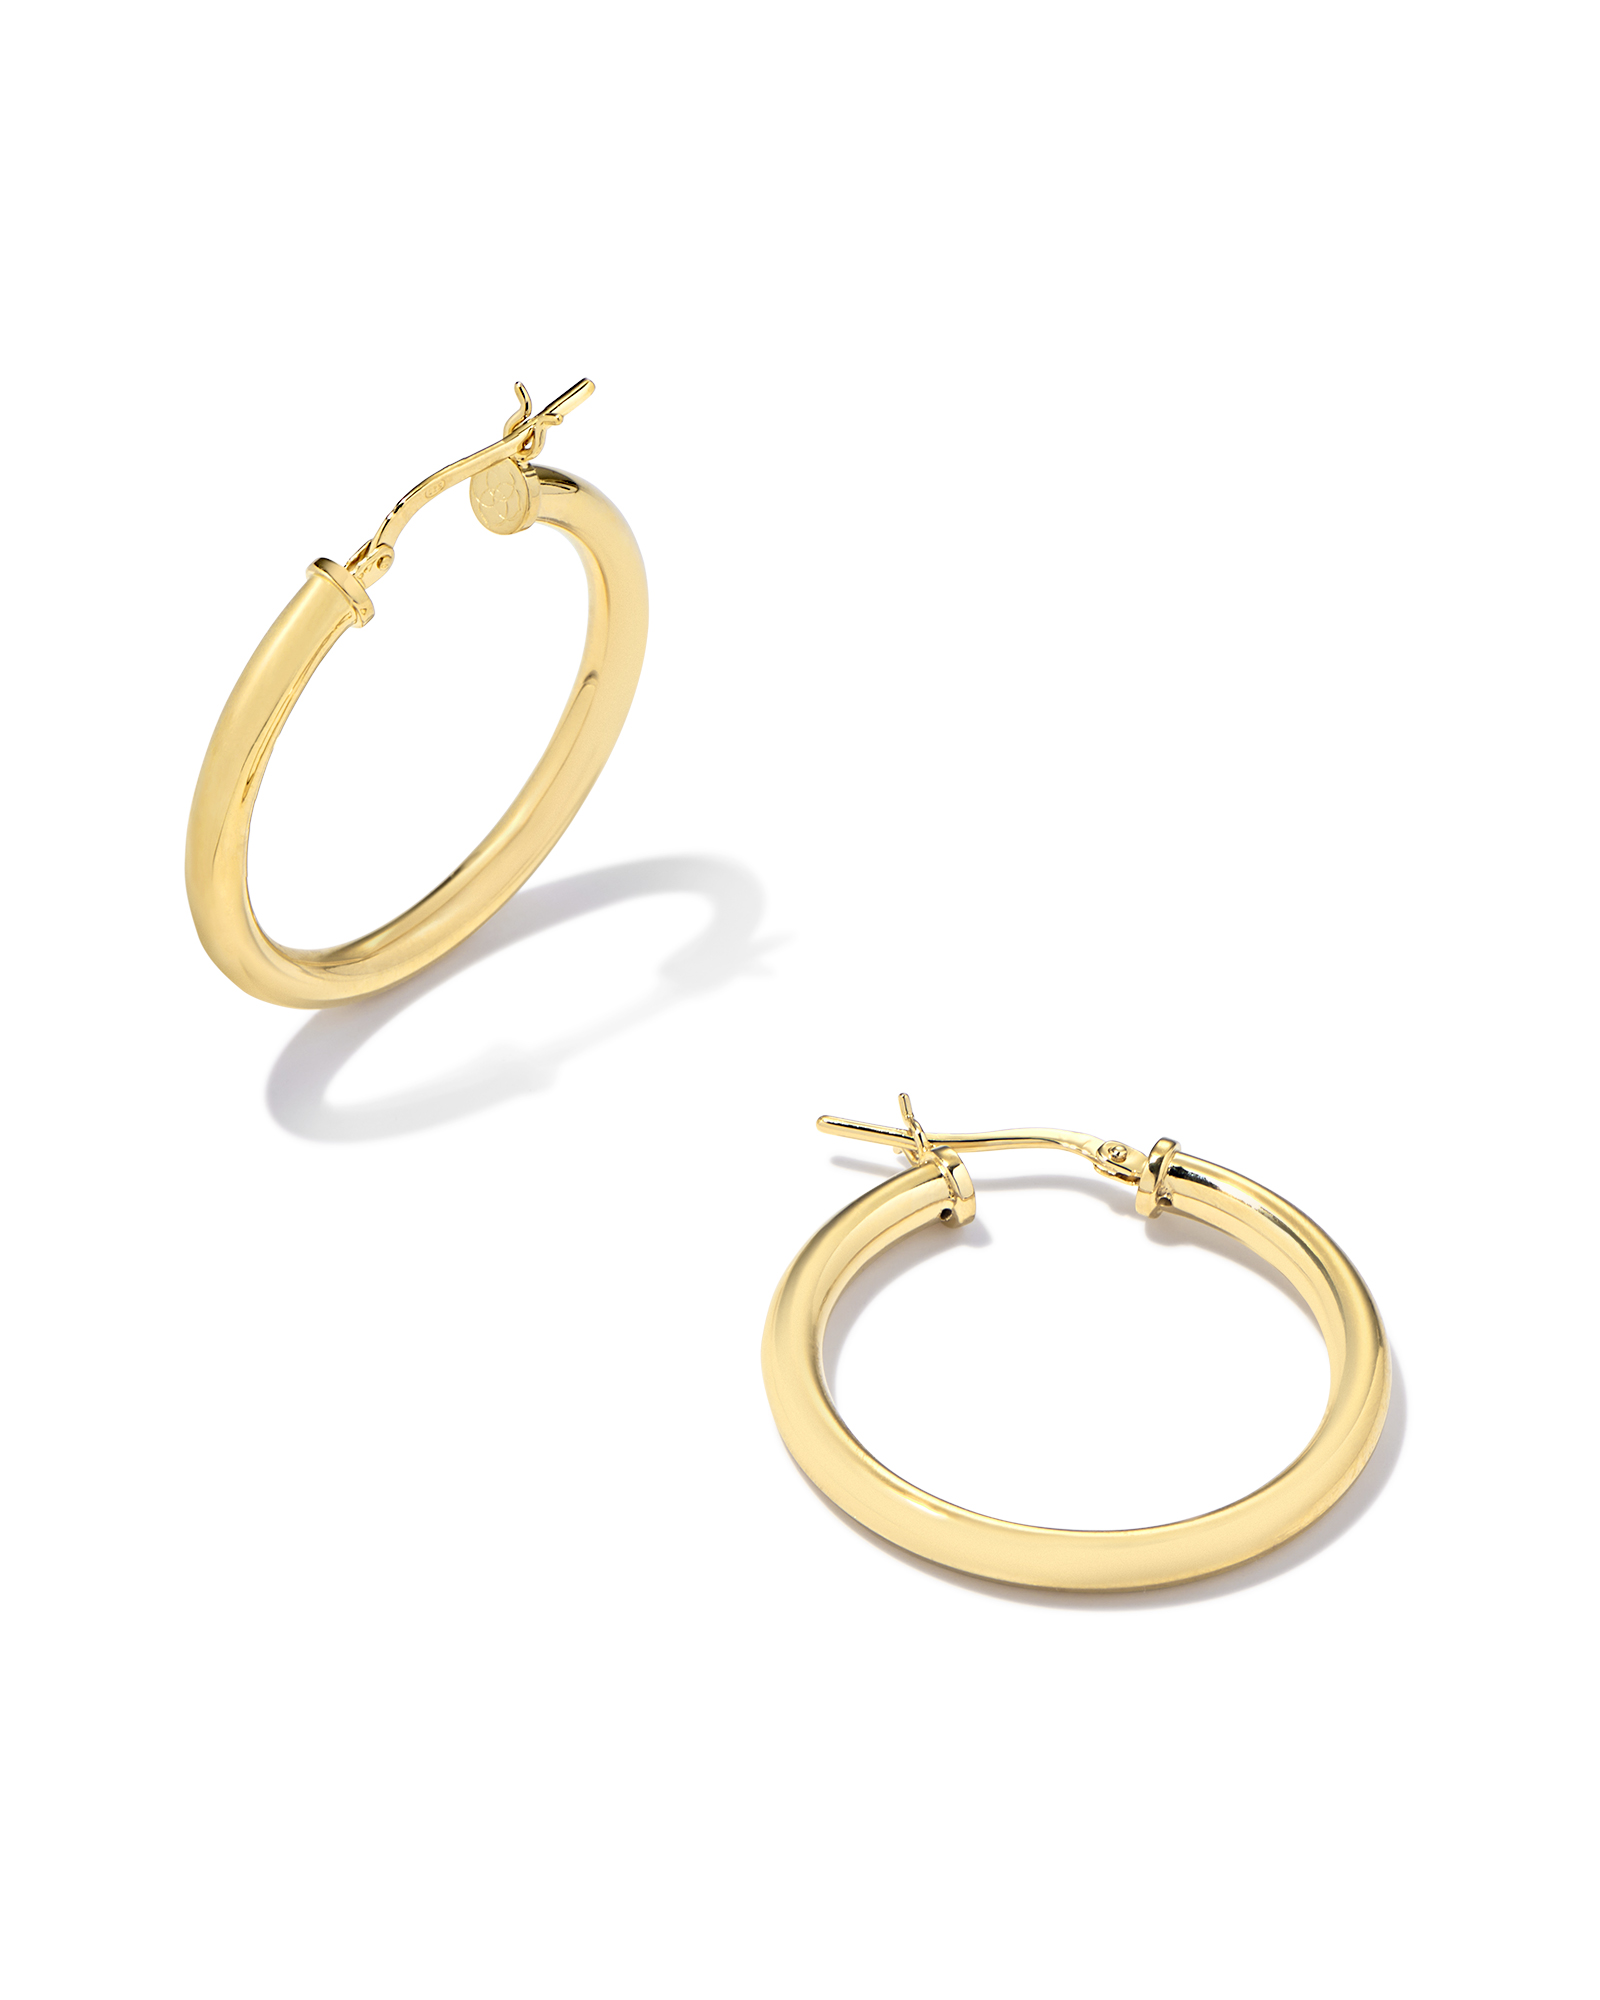 Thick Tube Hoops, Gold Plated 30mm Post Earrings